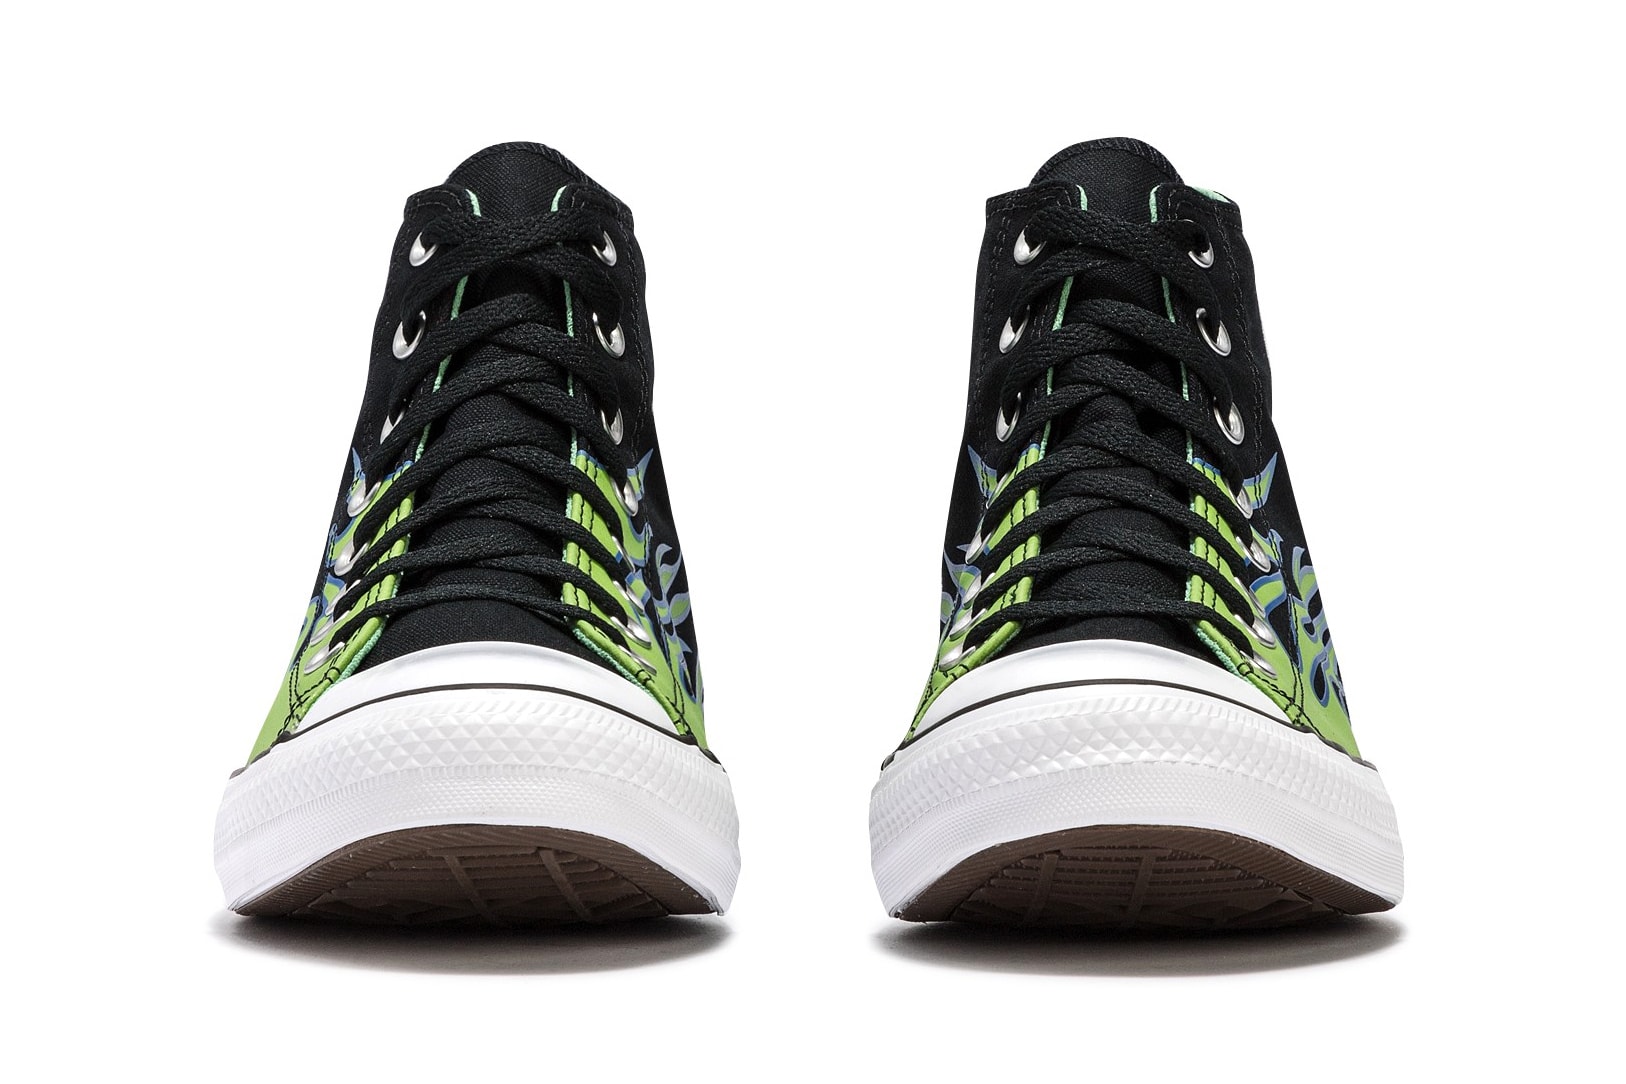 Converse Chuck Taylor All Star "Black/Glow In The Dark/Royal Pulse" Flame Motif Graphic Print Sneaker Release Information Drop Date Closer First Look HBX HYPEBEAST Footwear Shoe Trainer High Top 